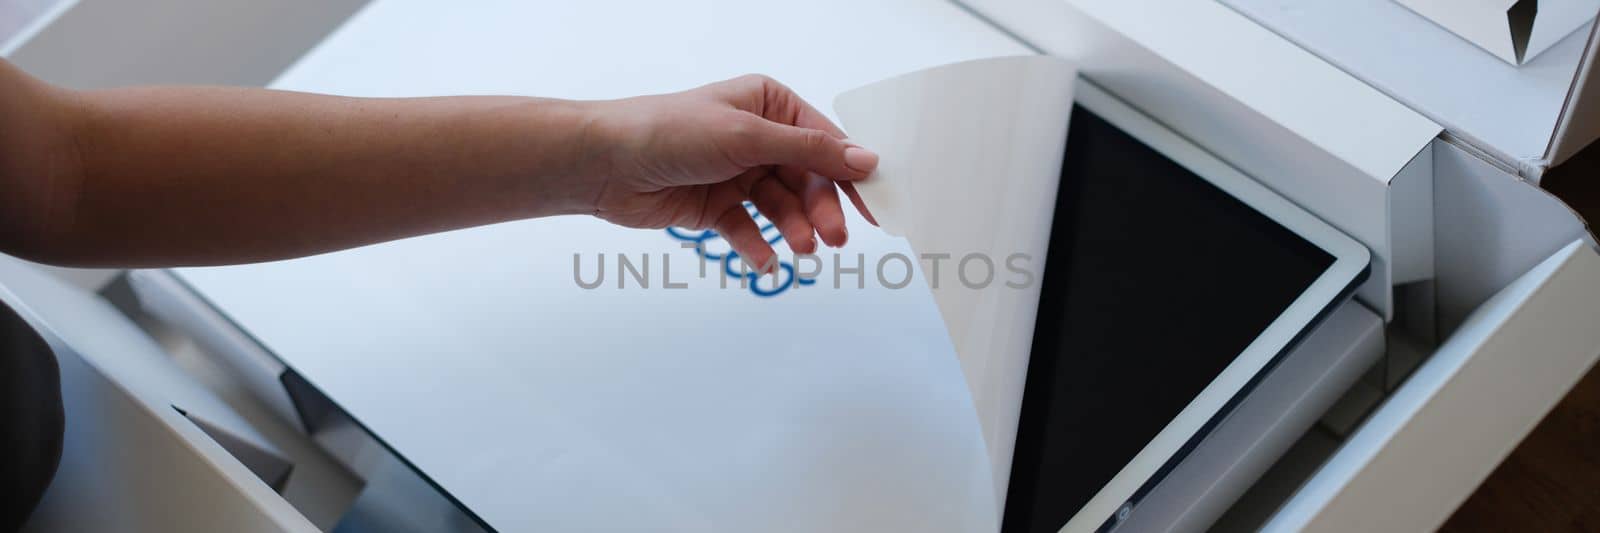 Tbilisi, Georgia - June 21, 2022: Person removes the protective film from new New iMac monitor. M1 is first purpose-built ARM-based system chip SoC